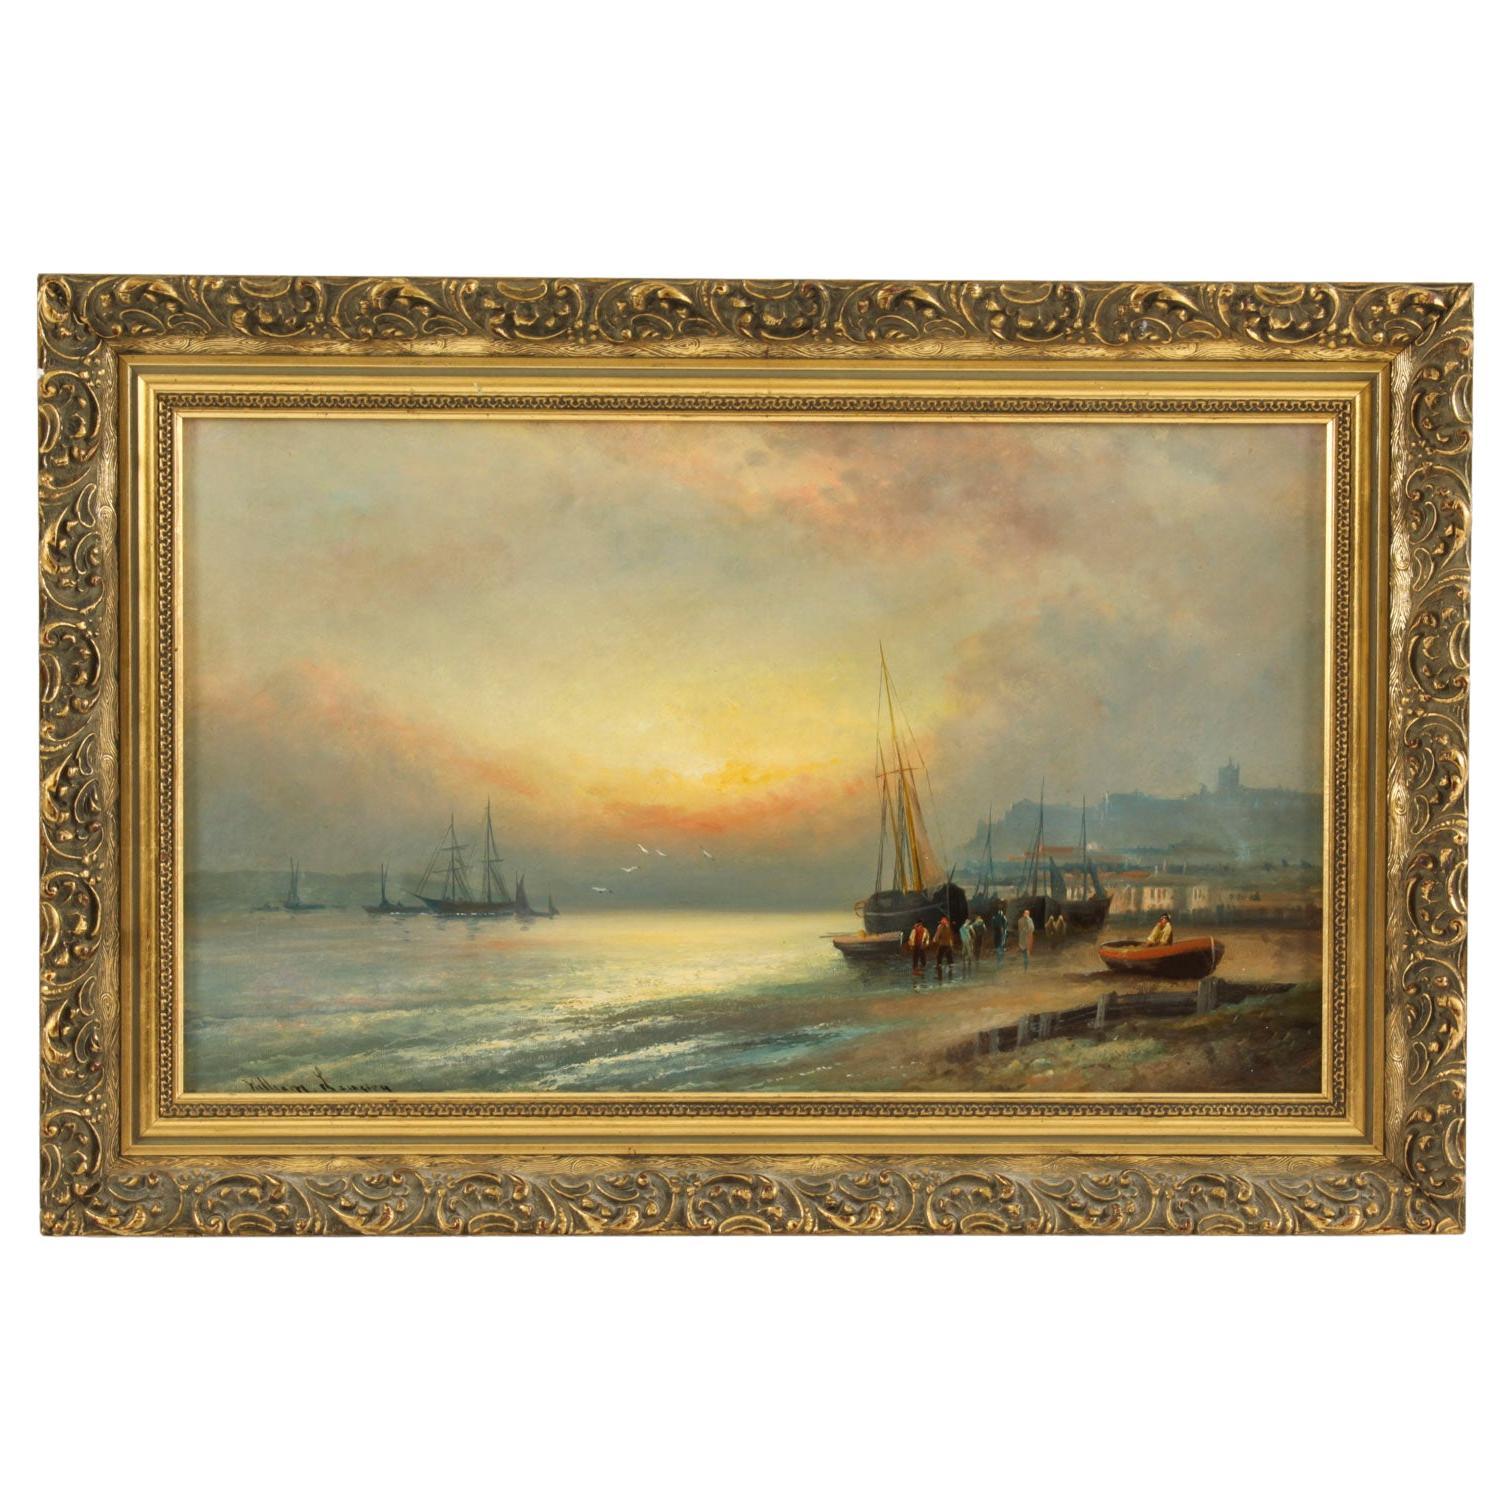 Antique Painting "Sunset at Low Tide" William Langley 19th Century